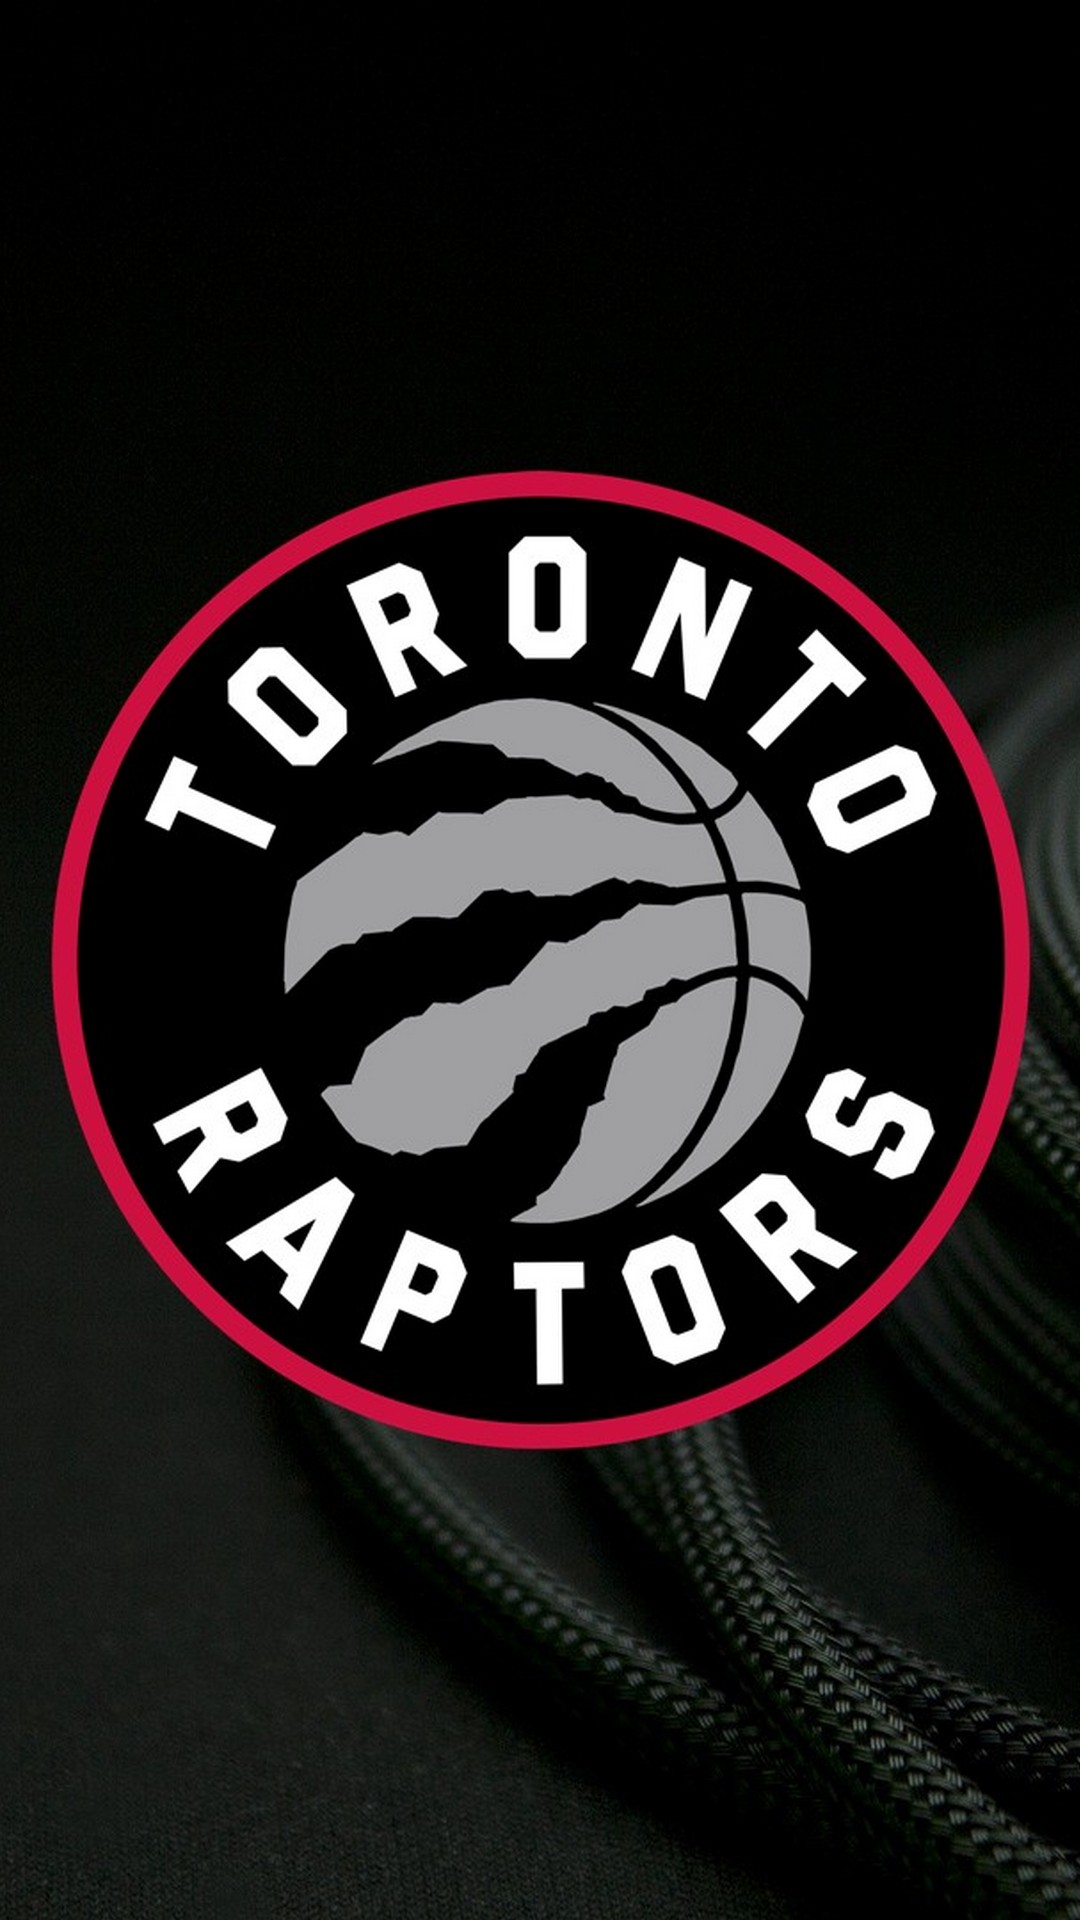 iPhone 8 Wallpaper Toronto Raptors with image resolution 1080x1920 pixel. You can make this wallpaper for your iPhone 5, 6, 7, 8, X backgrounds, Mobile Screensaver, or iPad Lock Screen